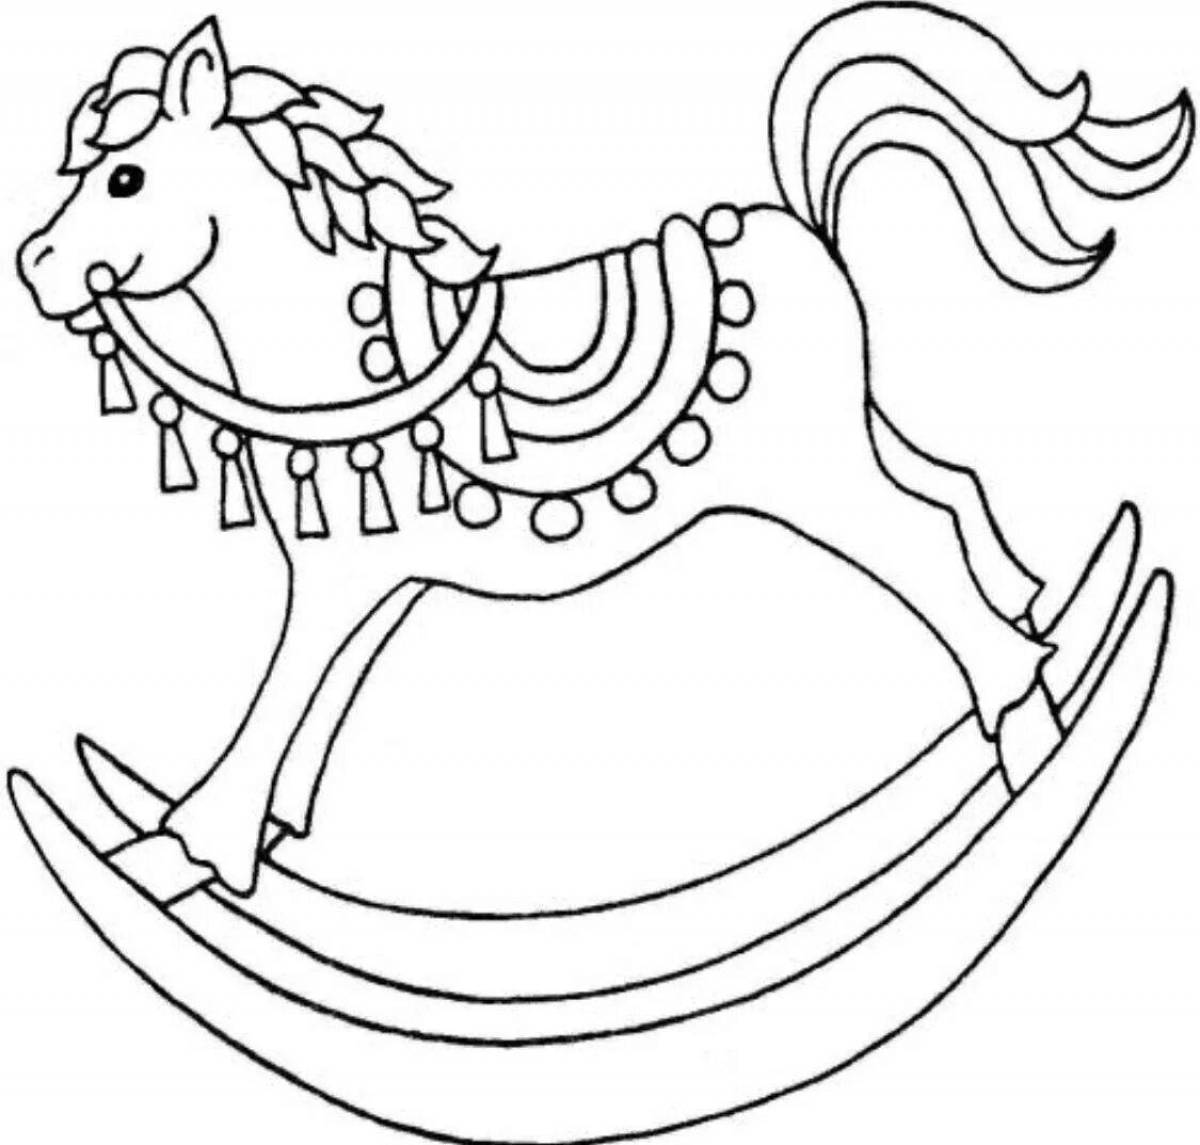 Glittering rocking chair coloring page